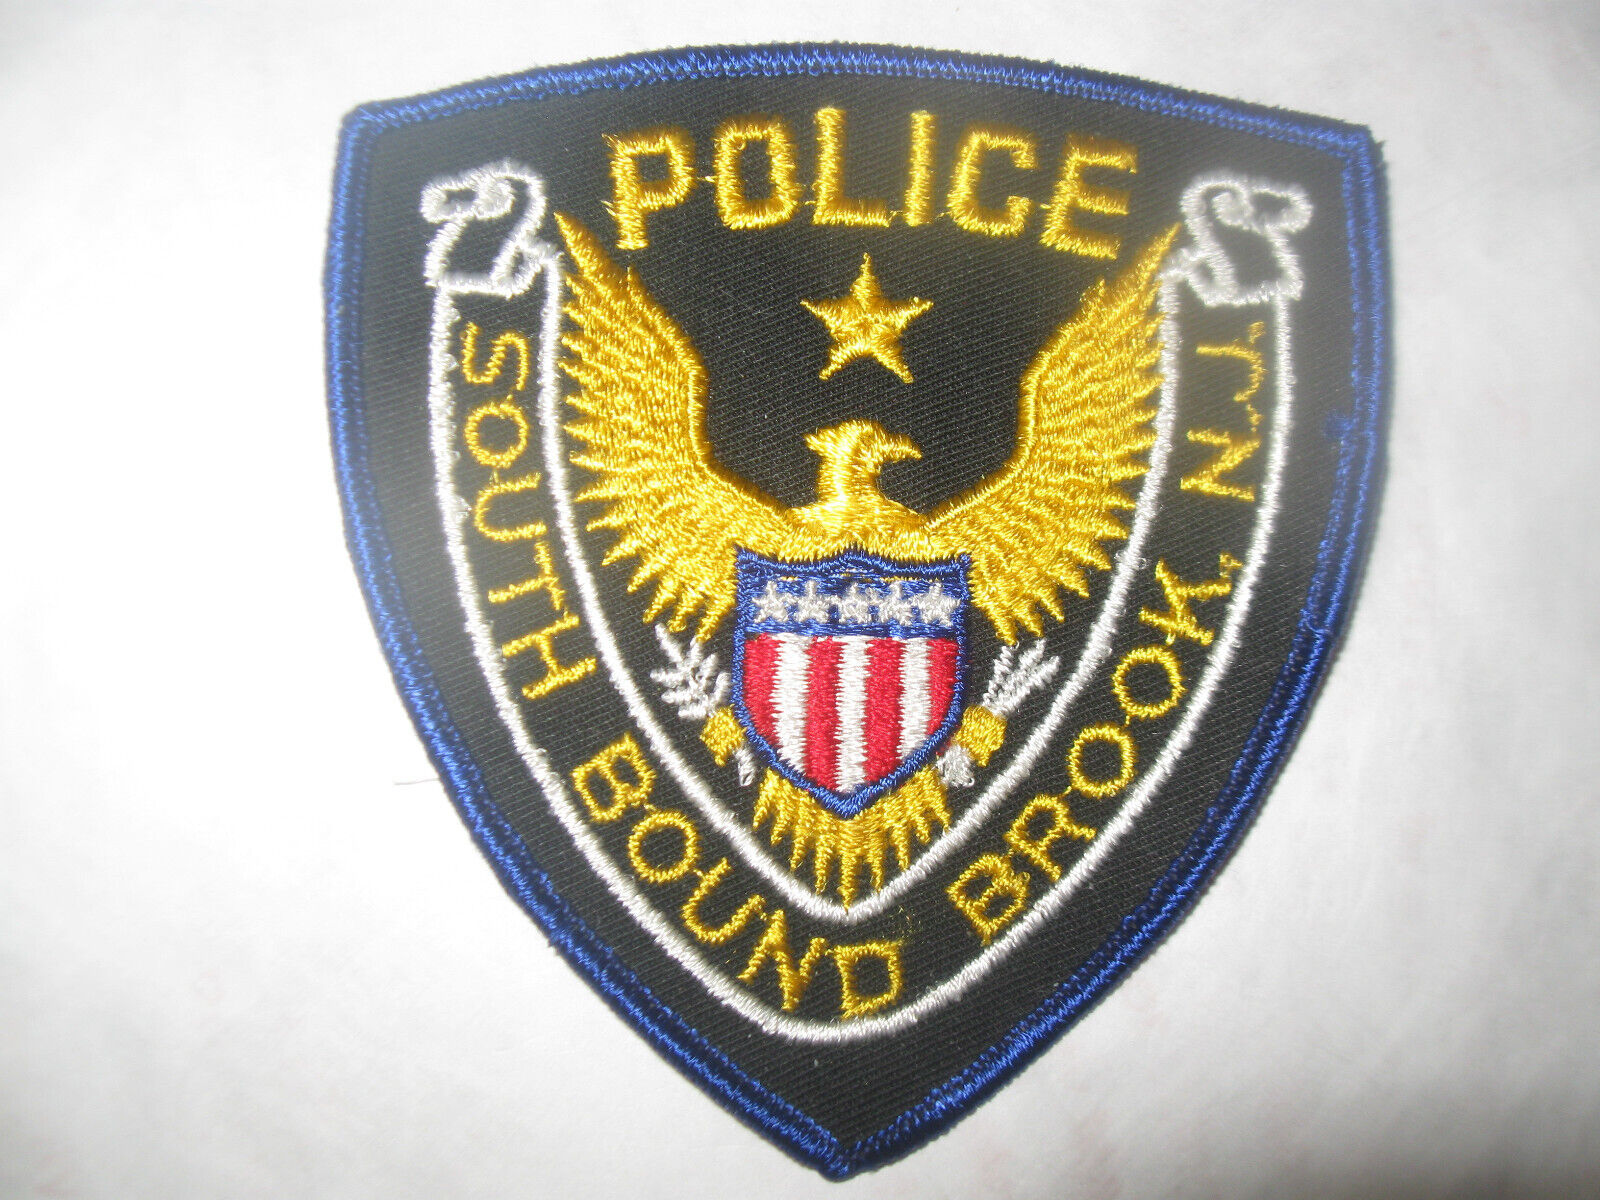 SOUTH BOUND BROOK NEW JERSEY POLICE PATCH (STOCK EAGLE)